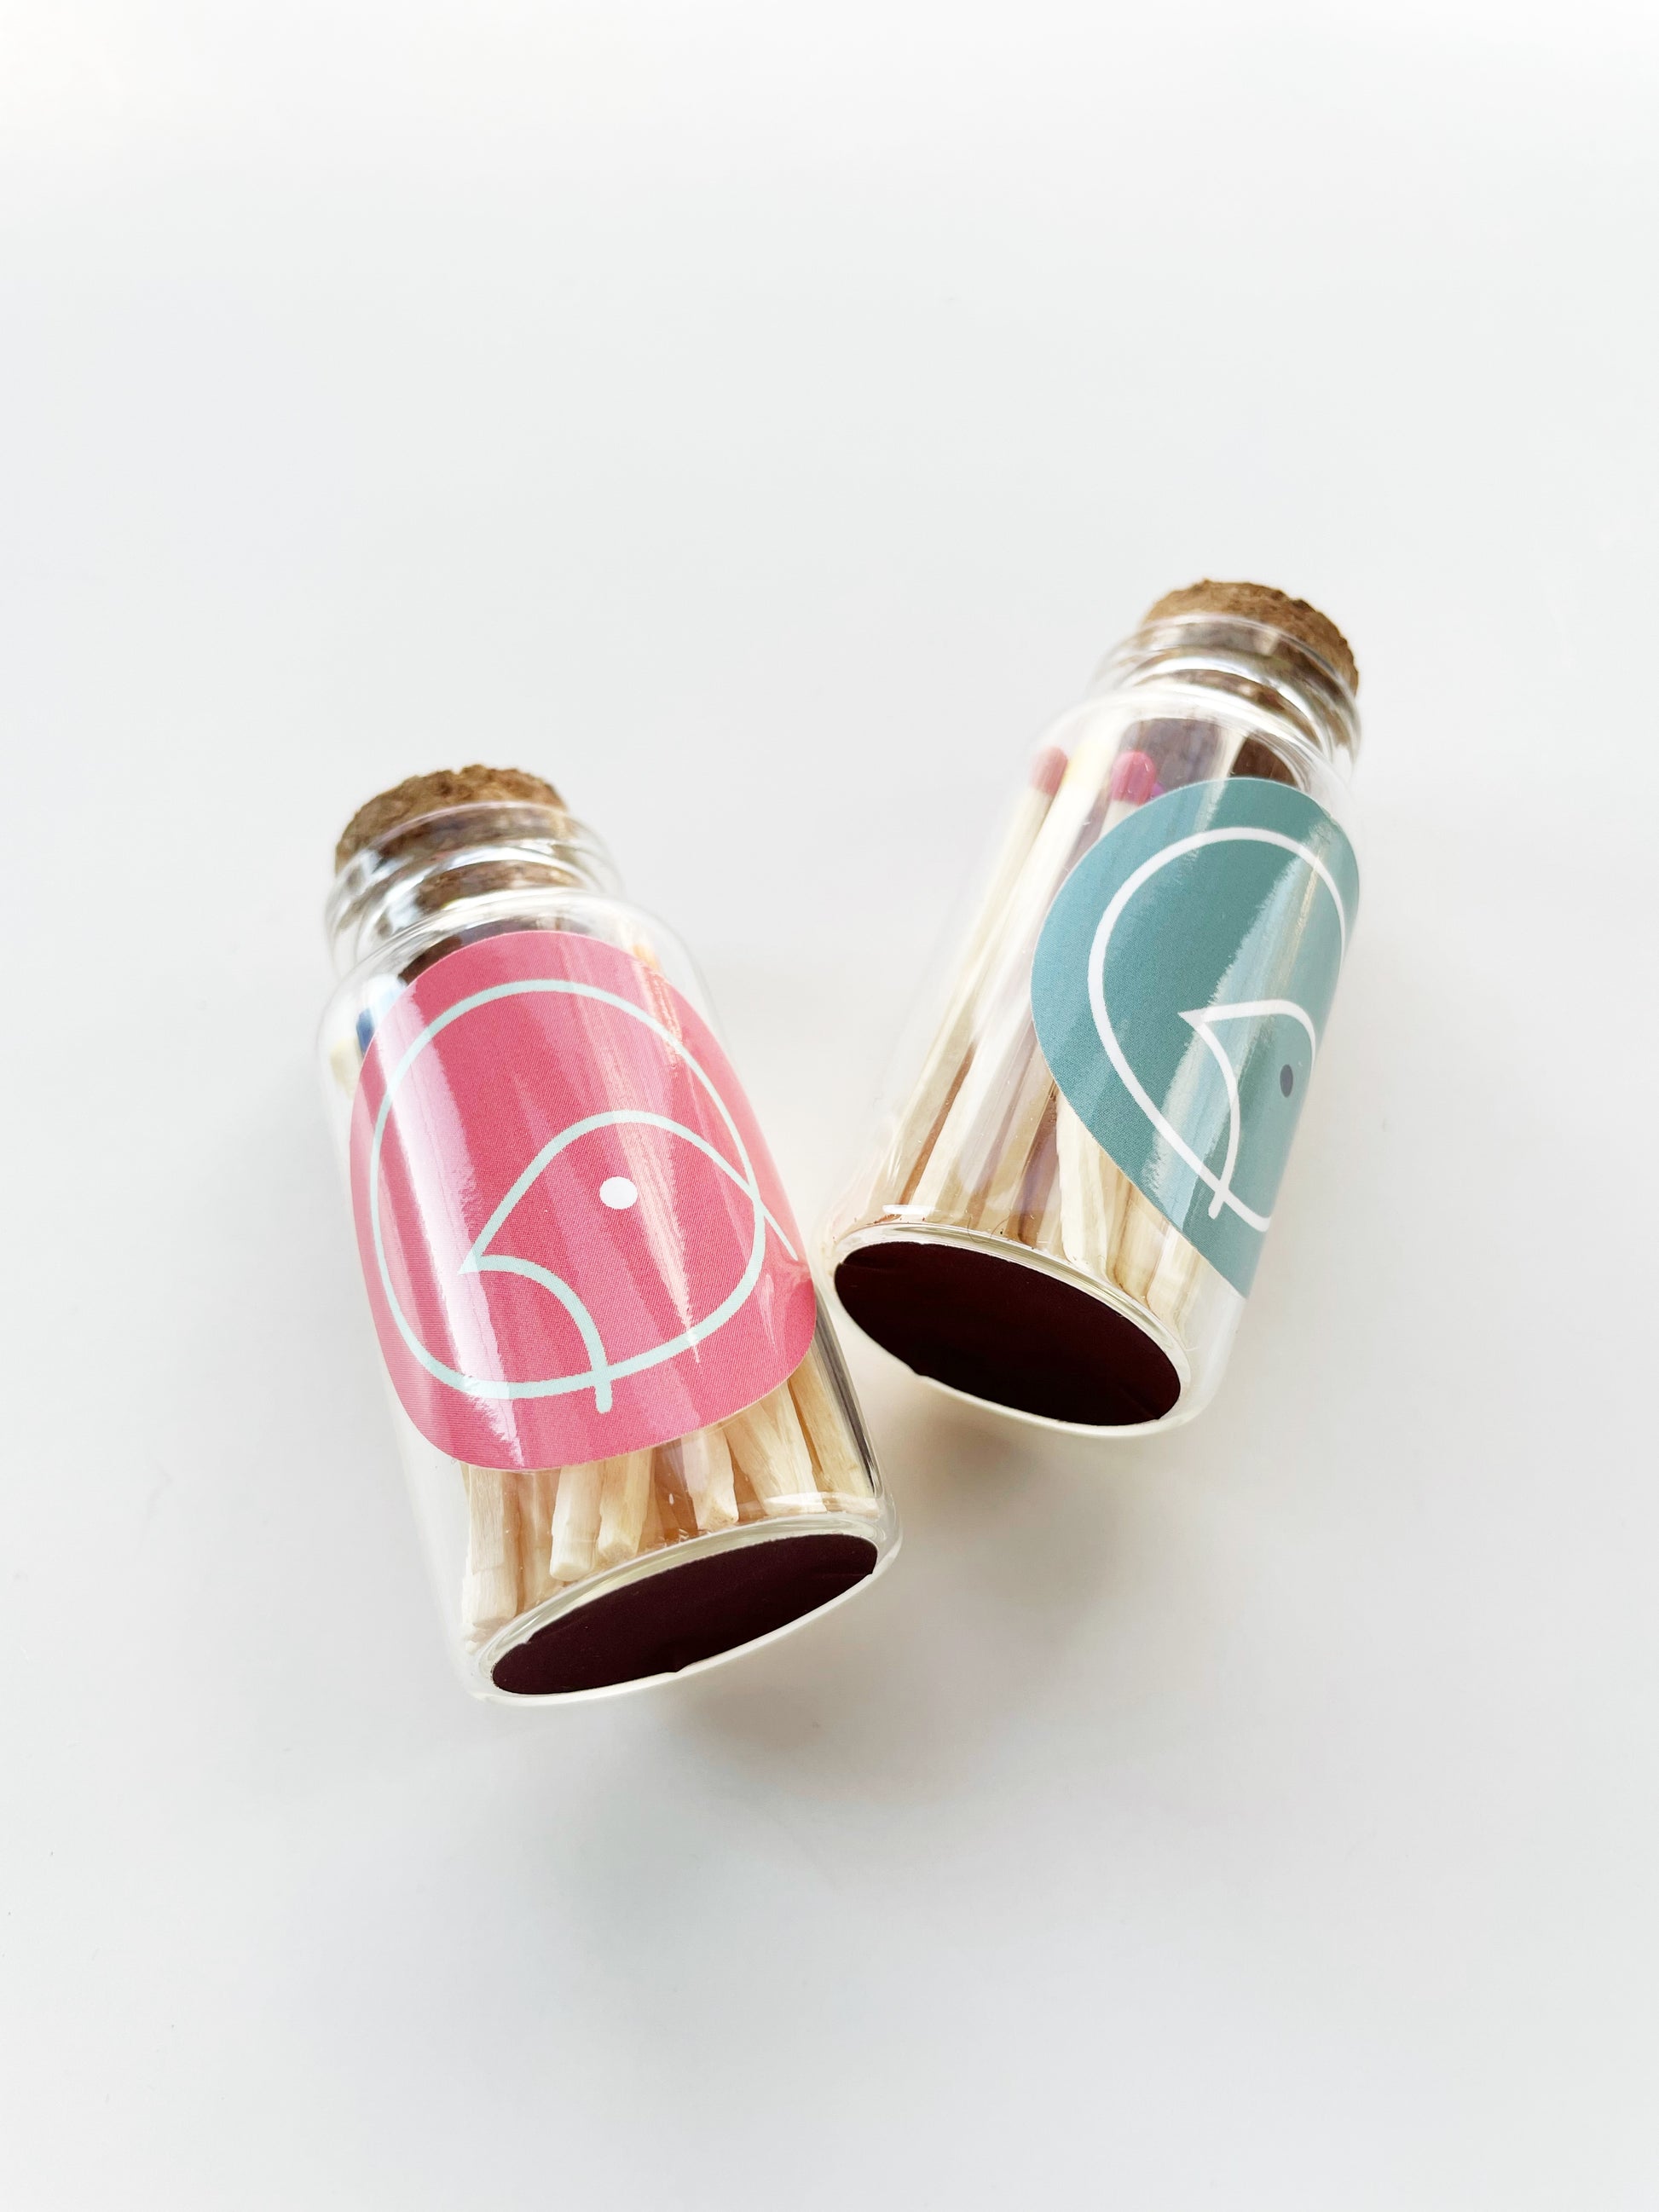 Two small glass jars with 30 rainbow colour tipped safety matches in them. The jars have a cork stopper and have blue and pink labels on them. The jars have strike pads on their base.